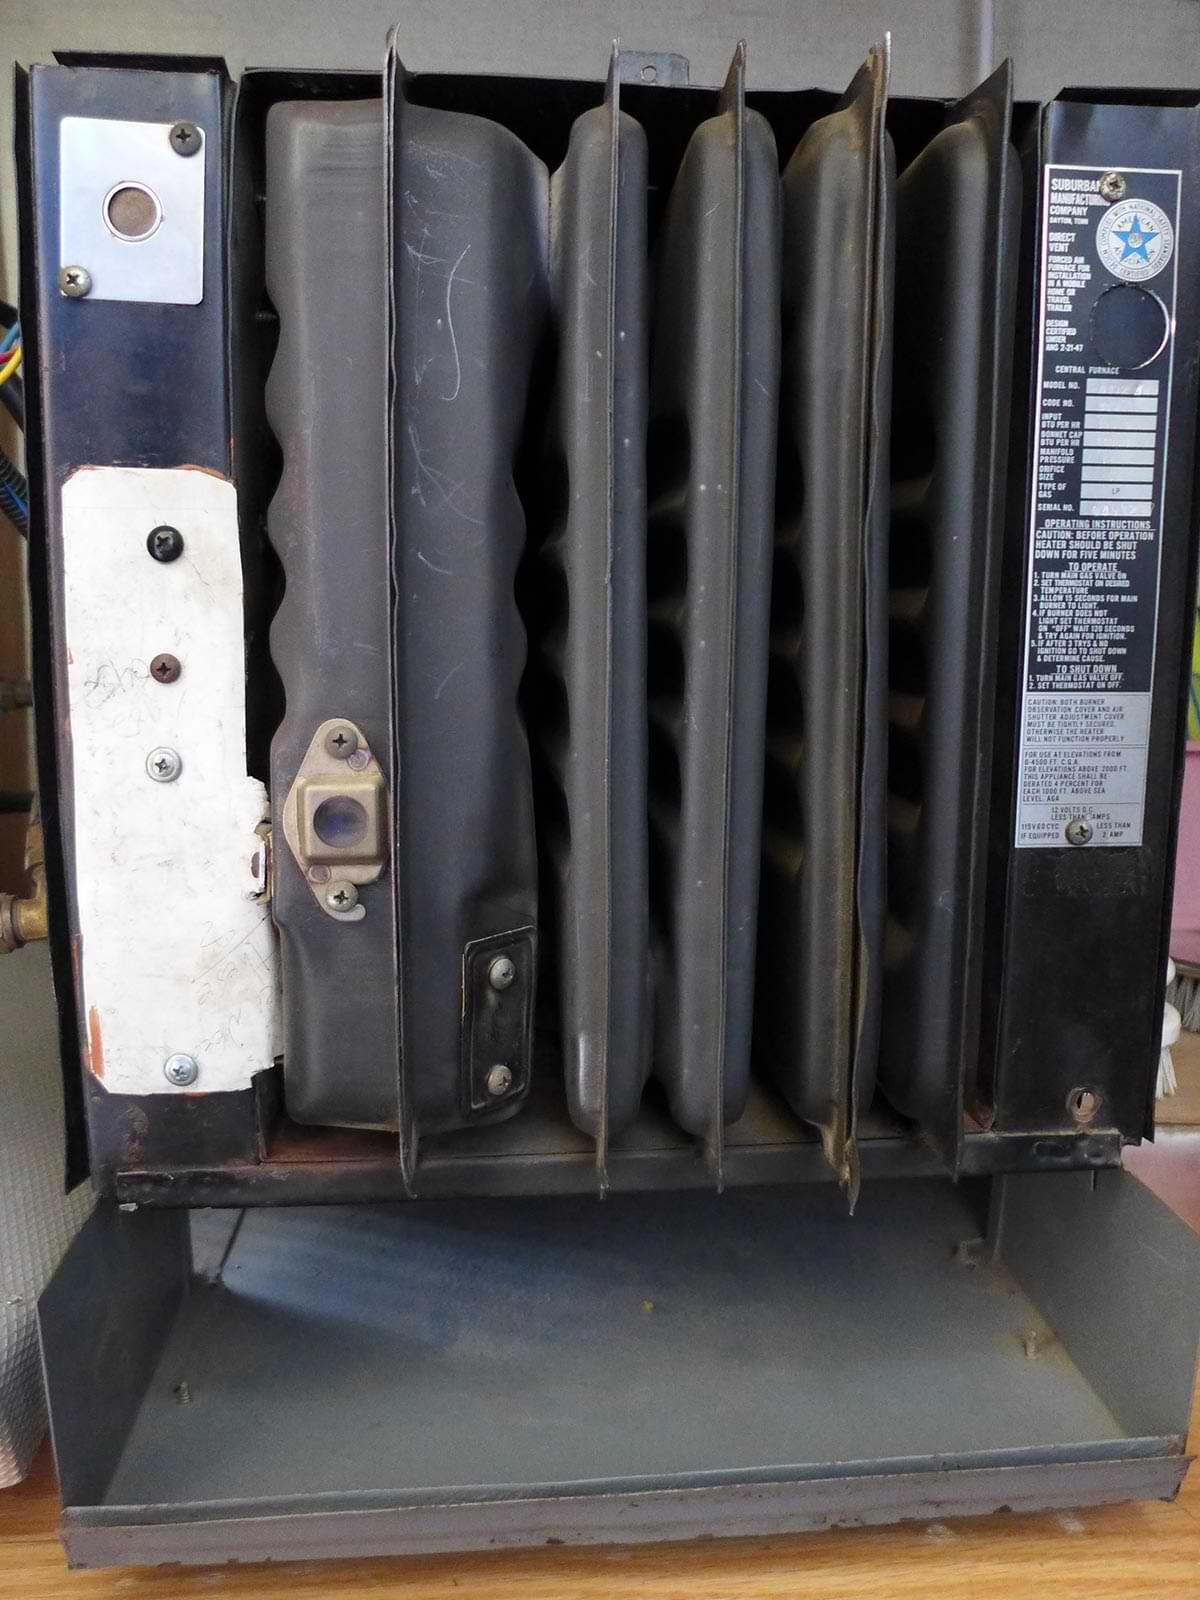 an older Suburban T-Series furnace with the front cover removed and the sight glass visible